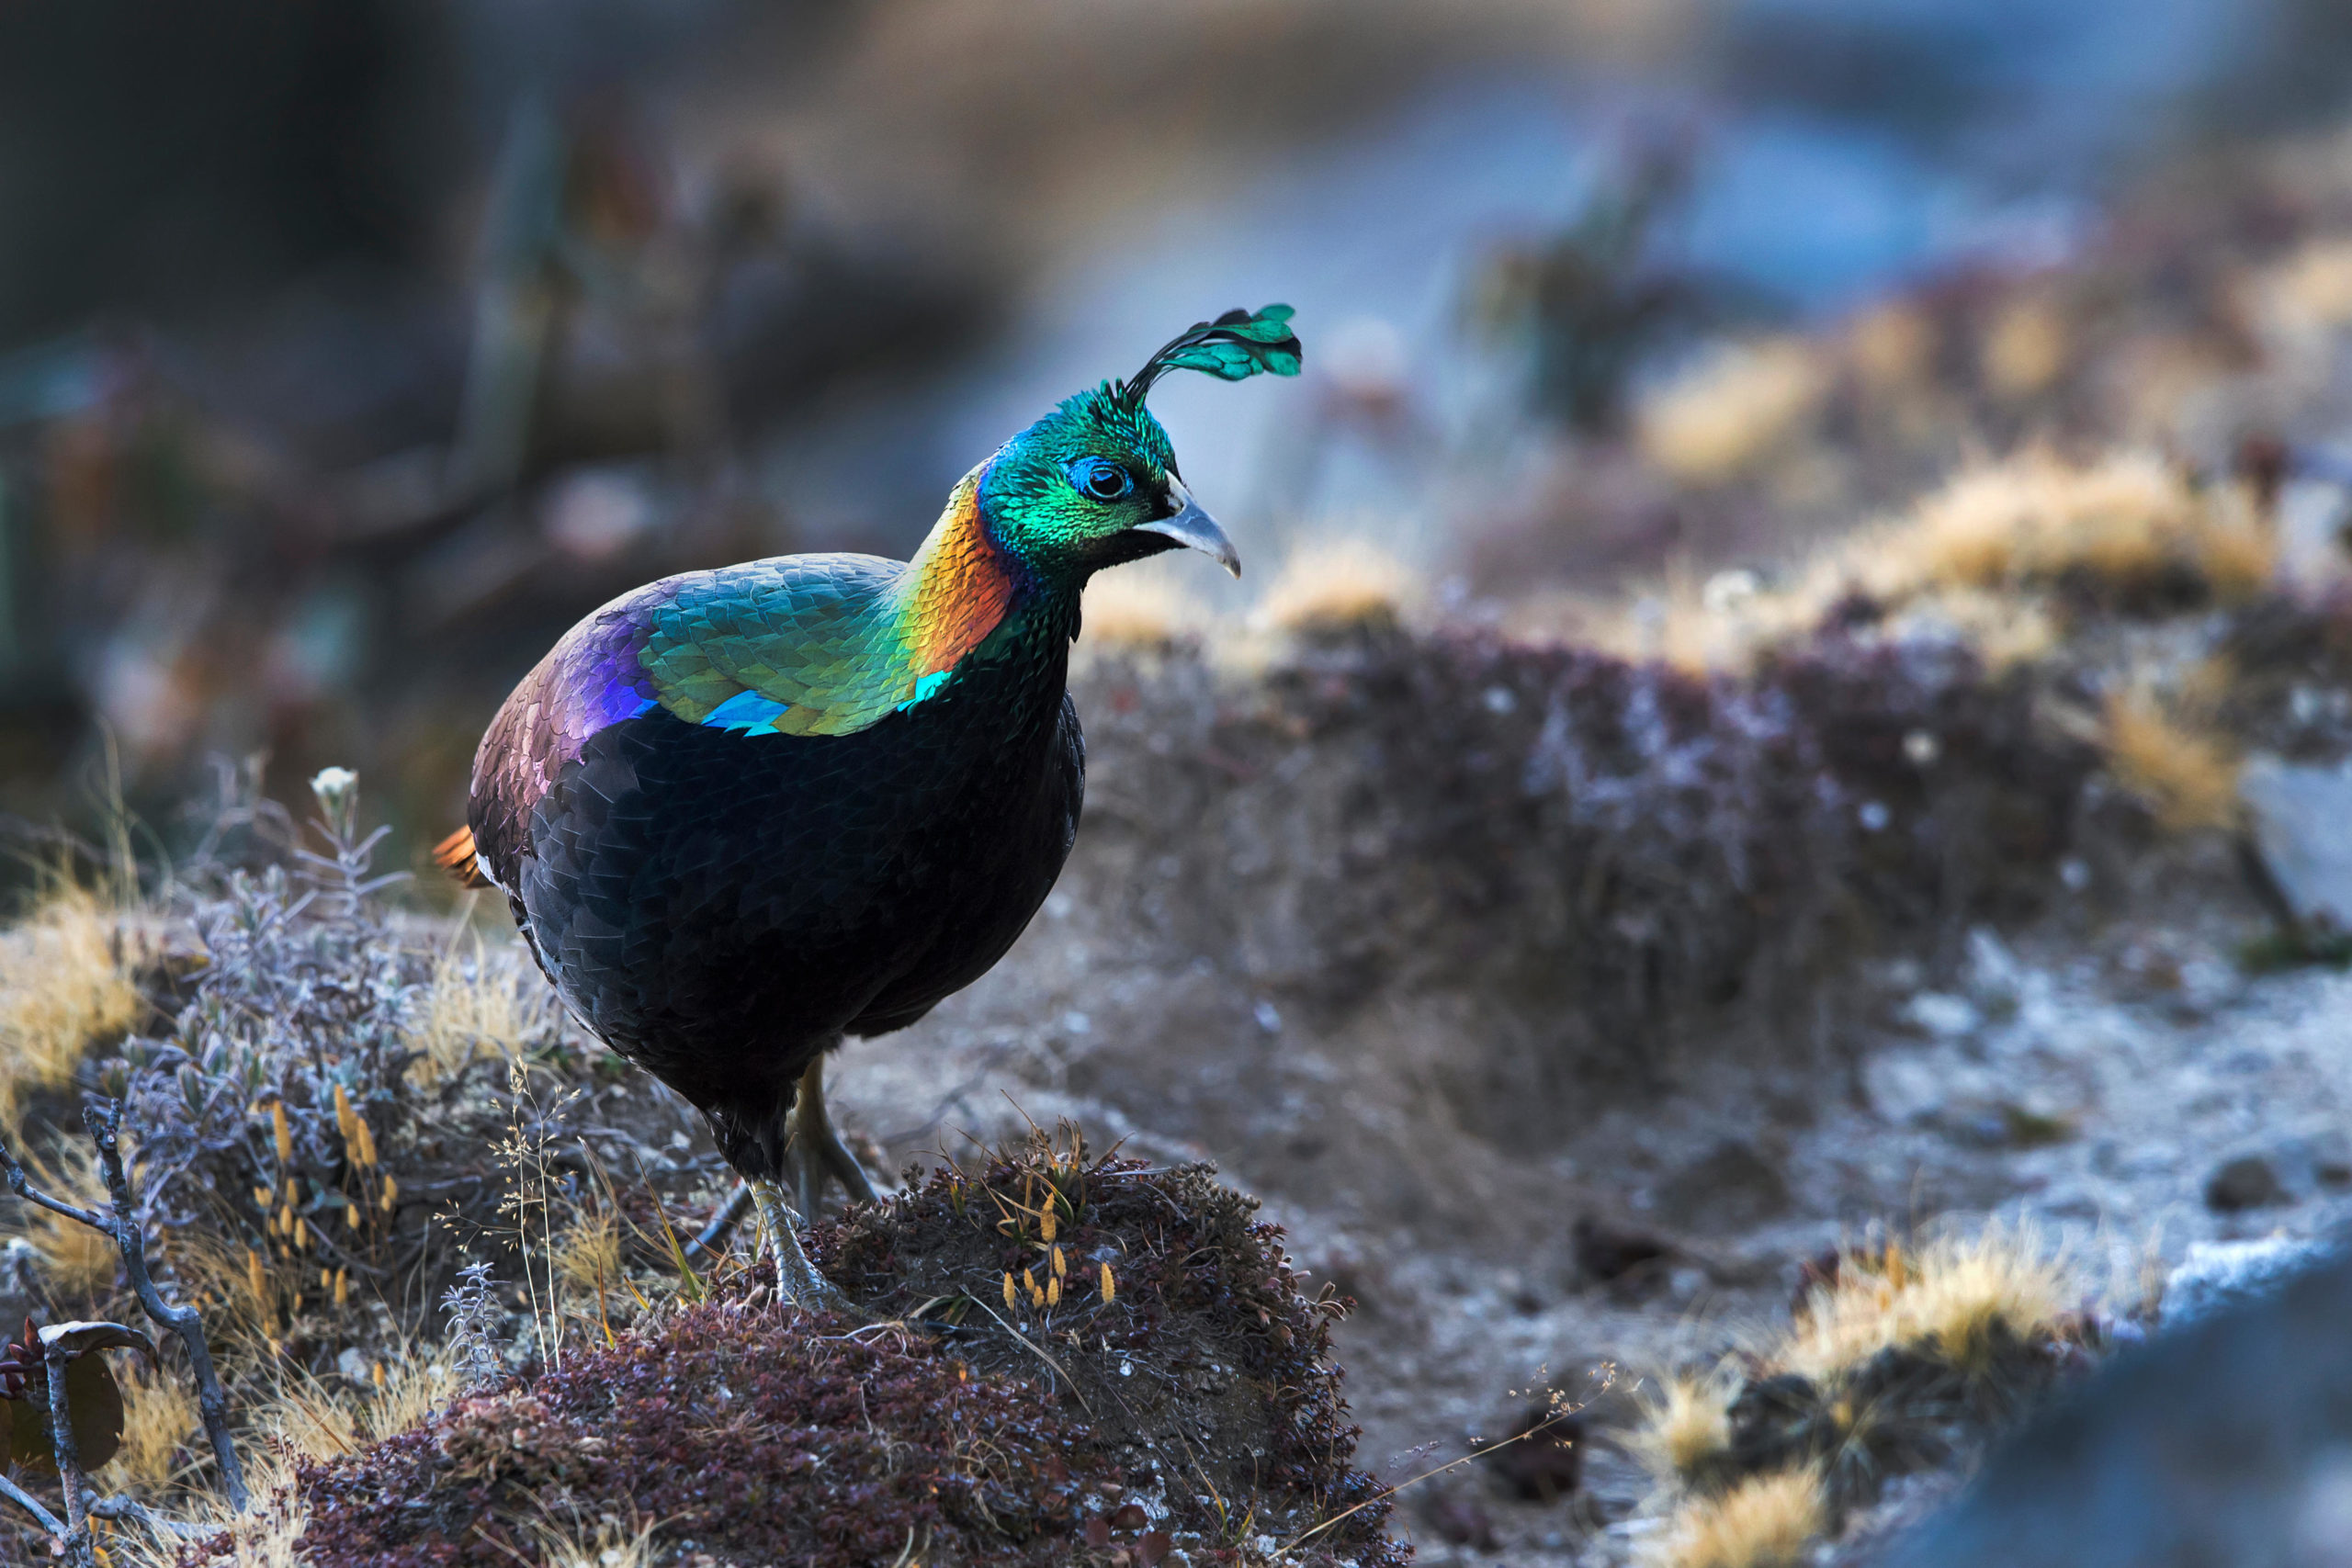 <p>The Himalayan monal  – the national bird of Nepal and state bird of Uttarakhand  – is emblematic of the vast biodiversity in the Hindu Kush Himalayas. Stopping and reversing biodiversity loss is crucial to tackling climate change and protecting the livelihoods and wellbeing of millions across the region (Image: Hira Punjabi / Alamy)</p>